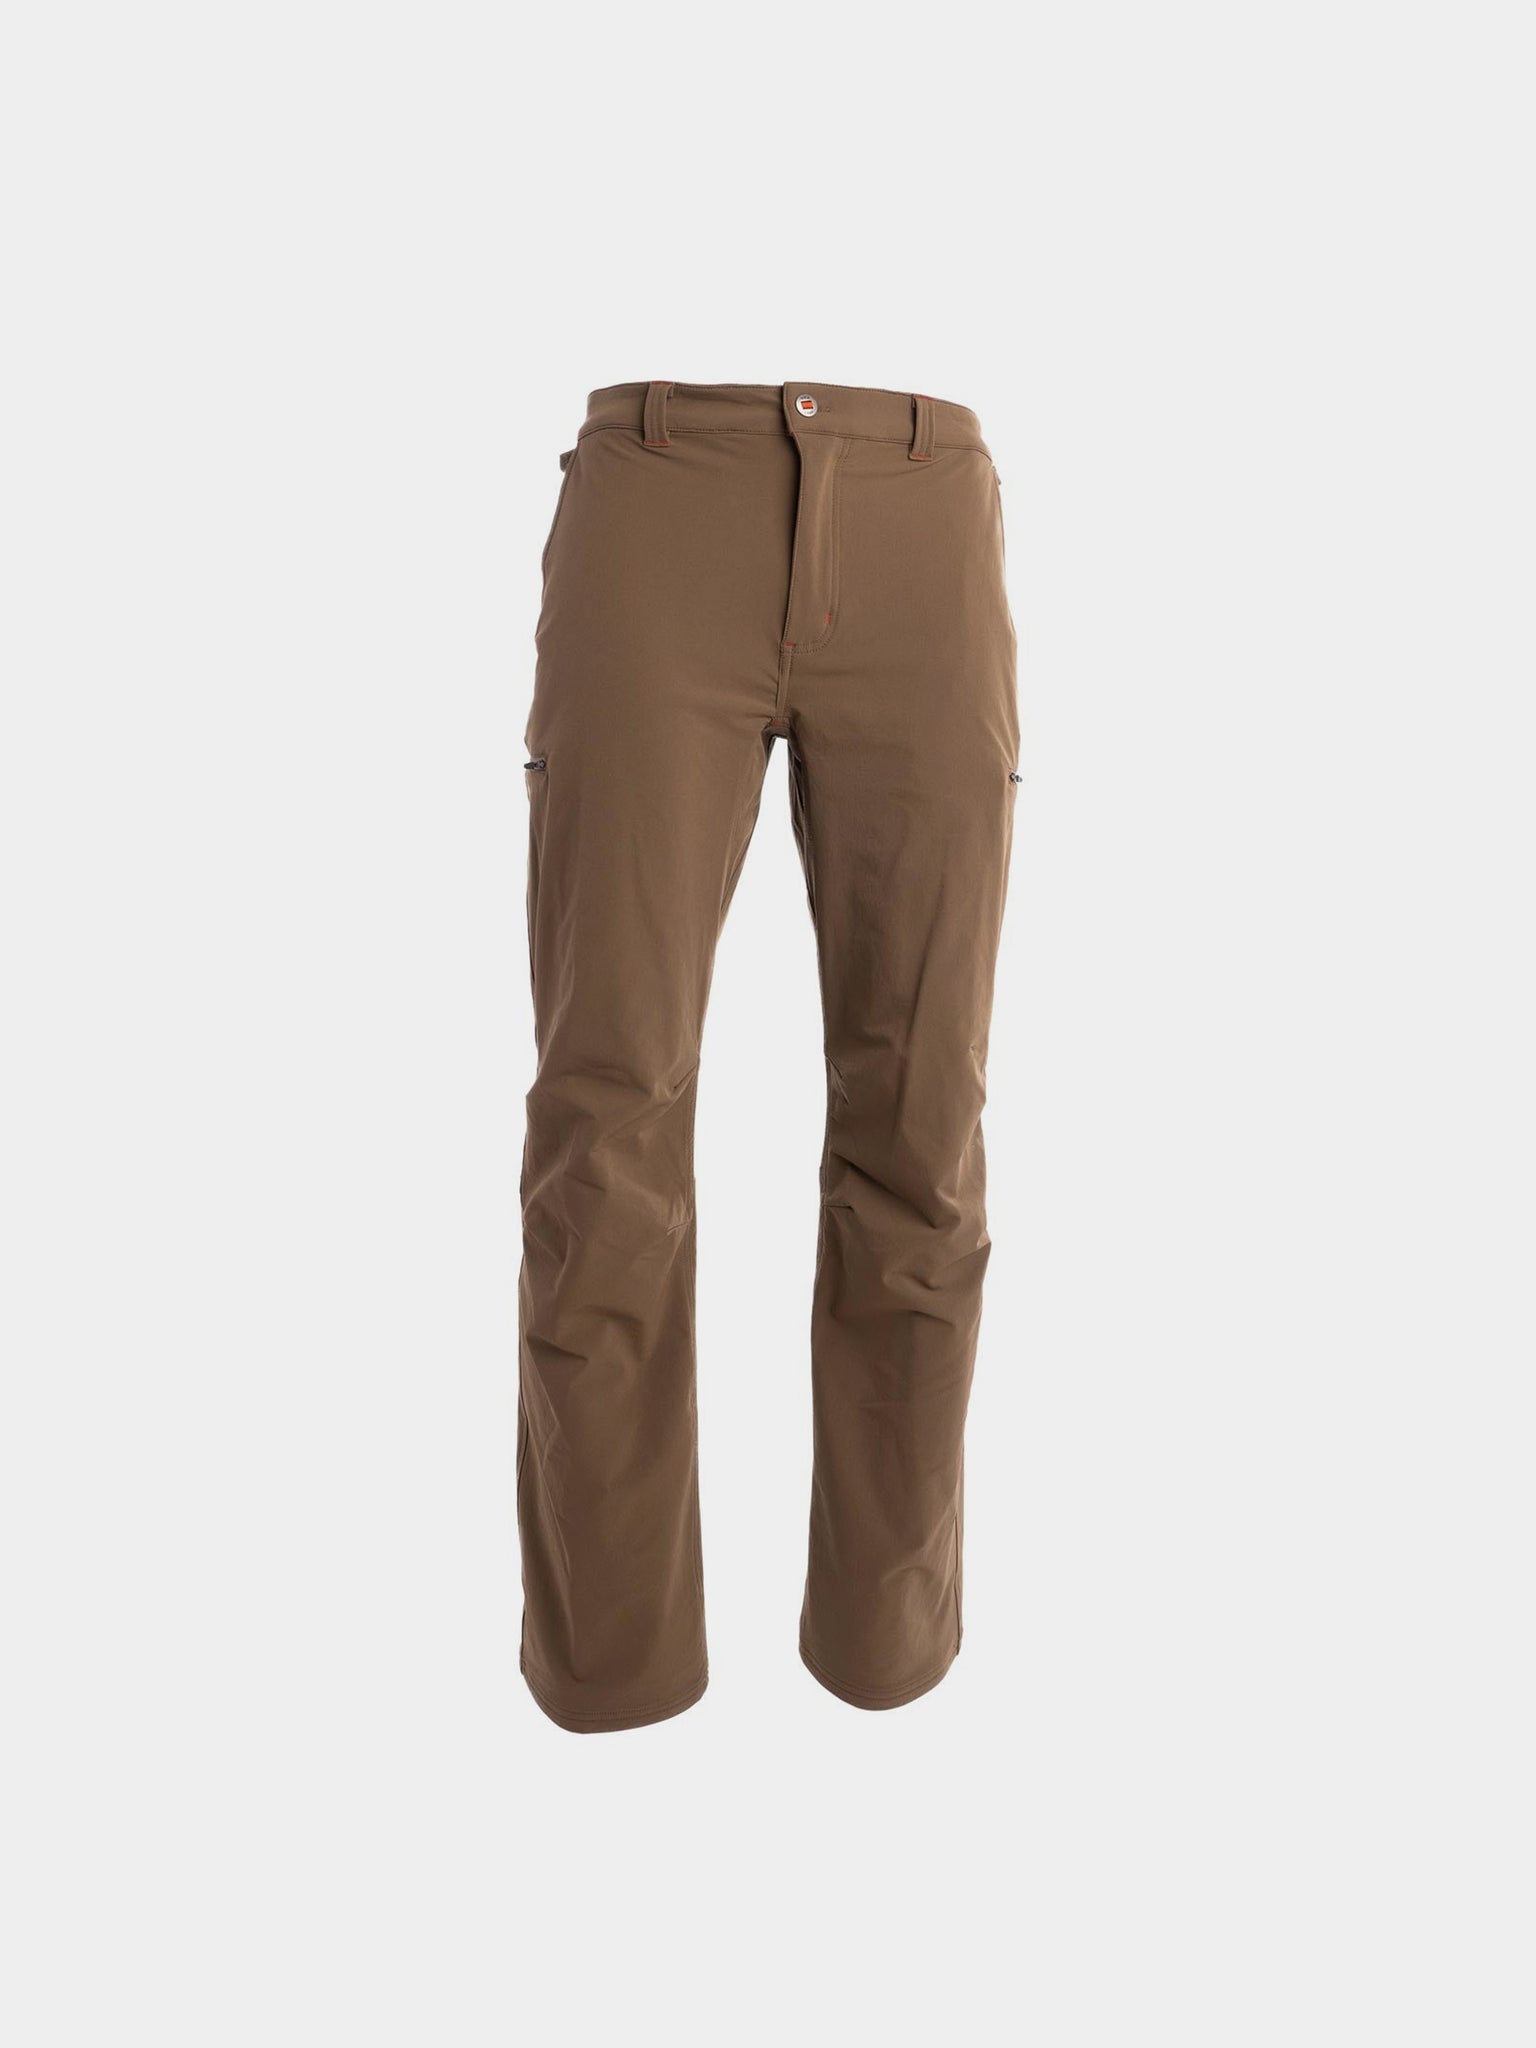 All Hunting Pants – Duck Camp